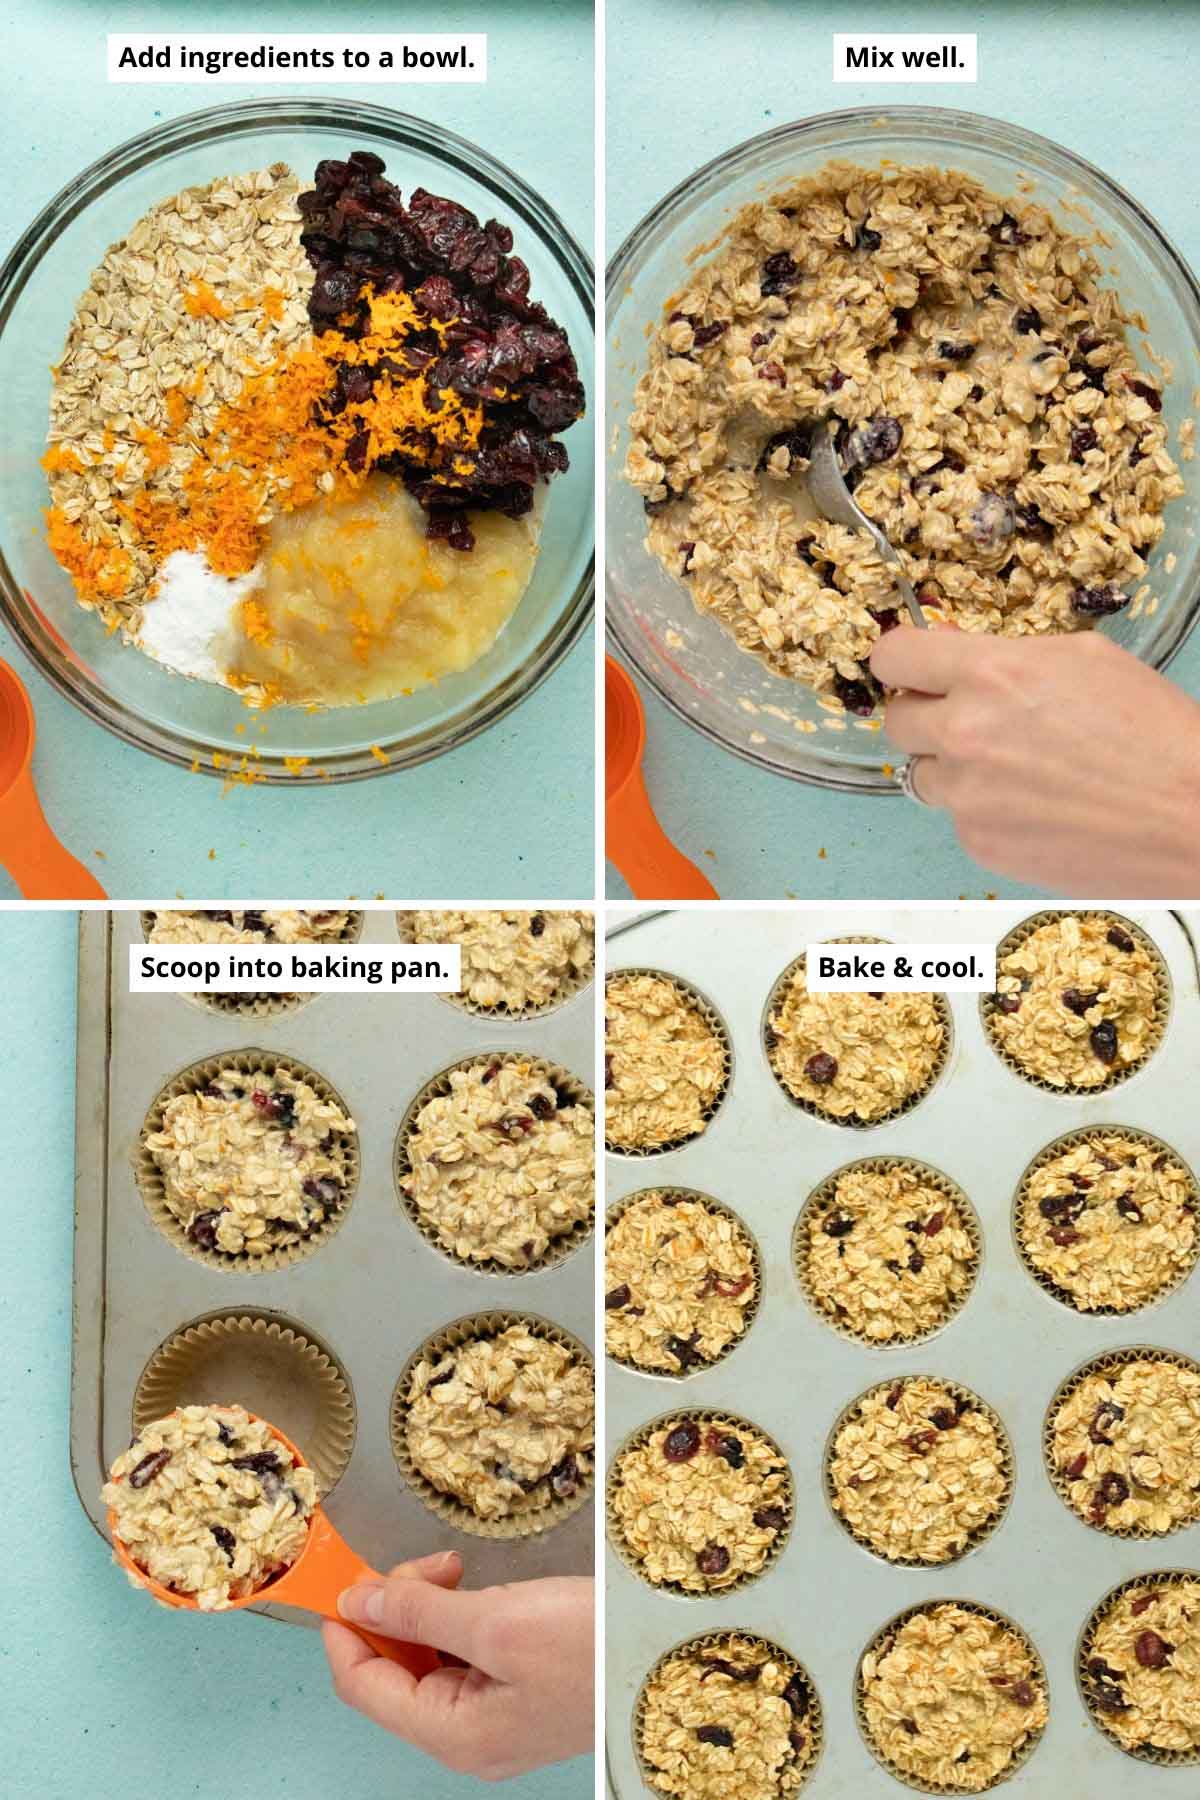 image collage showing batter ingredients before and after mixing, scooping oatmeal batter into the lined baking pan, and the vegan oatmeal cups in the pan after baking